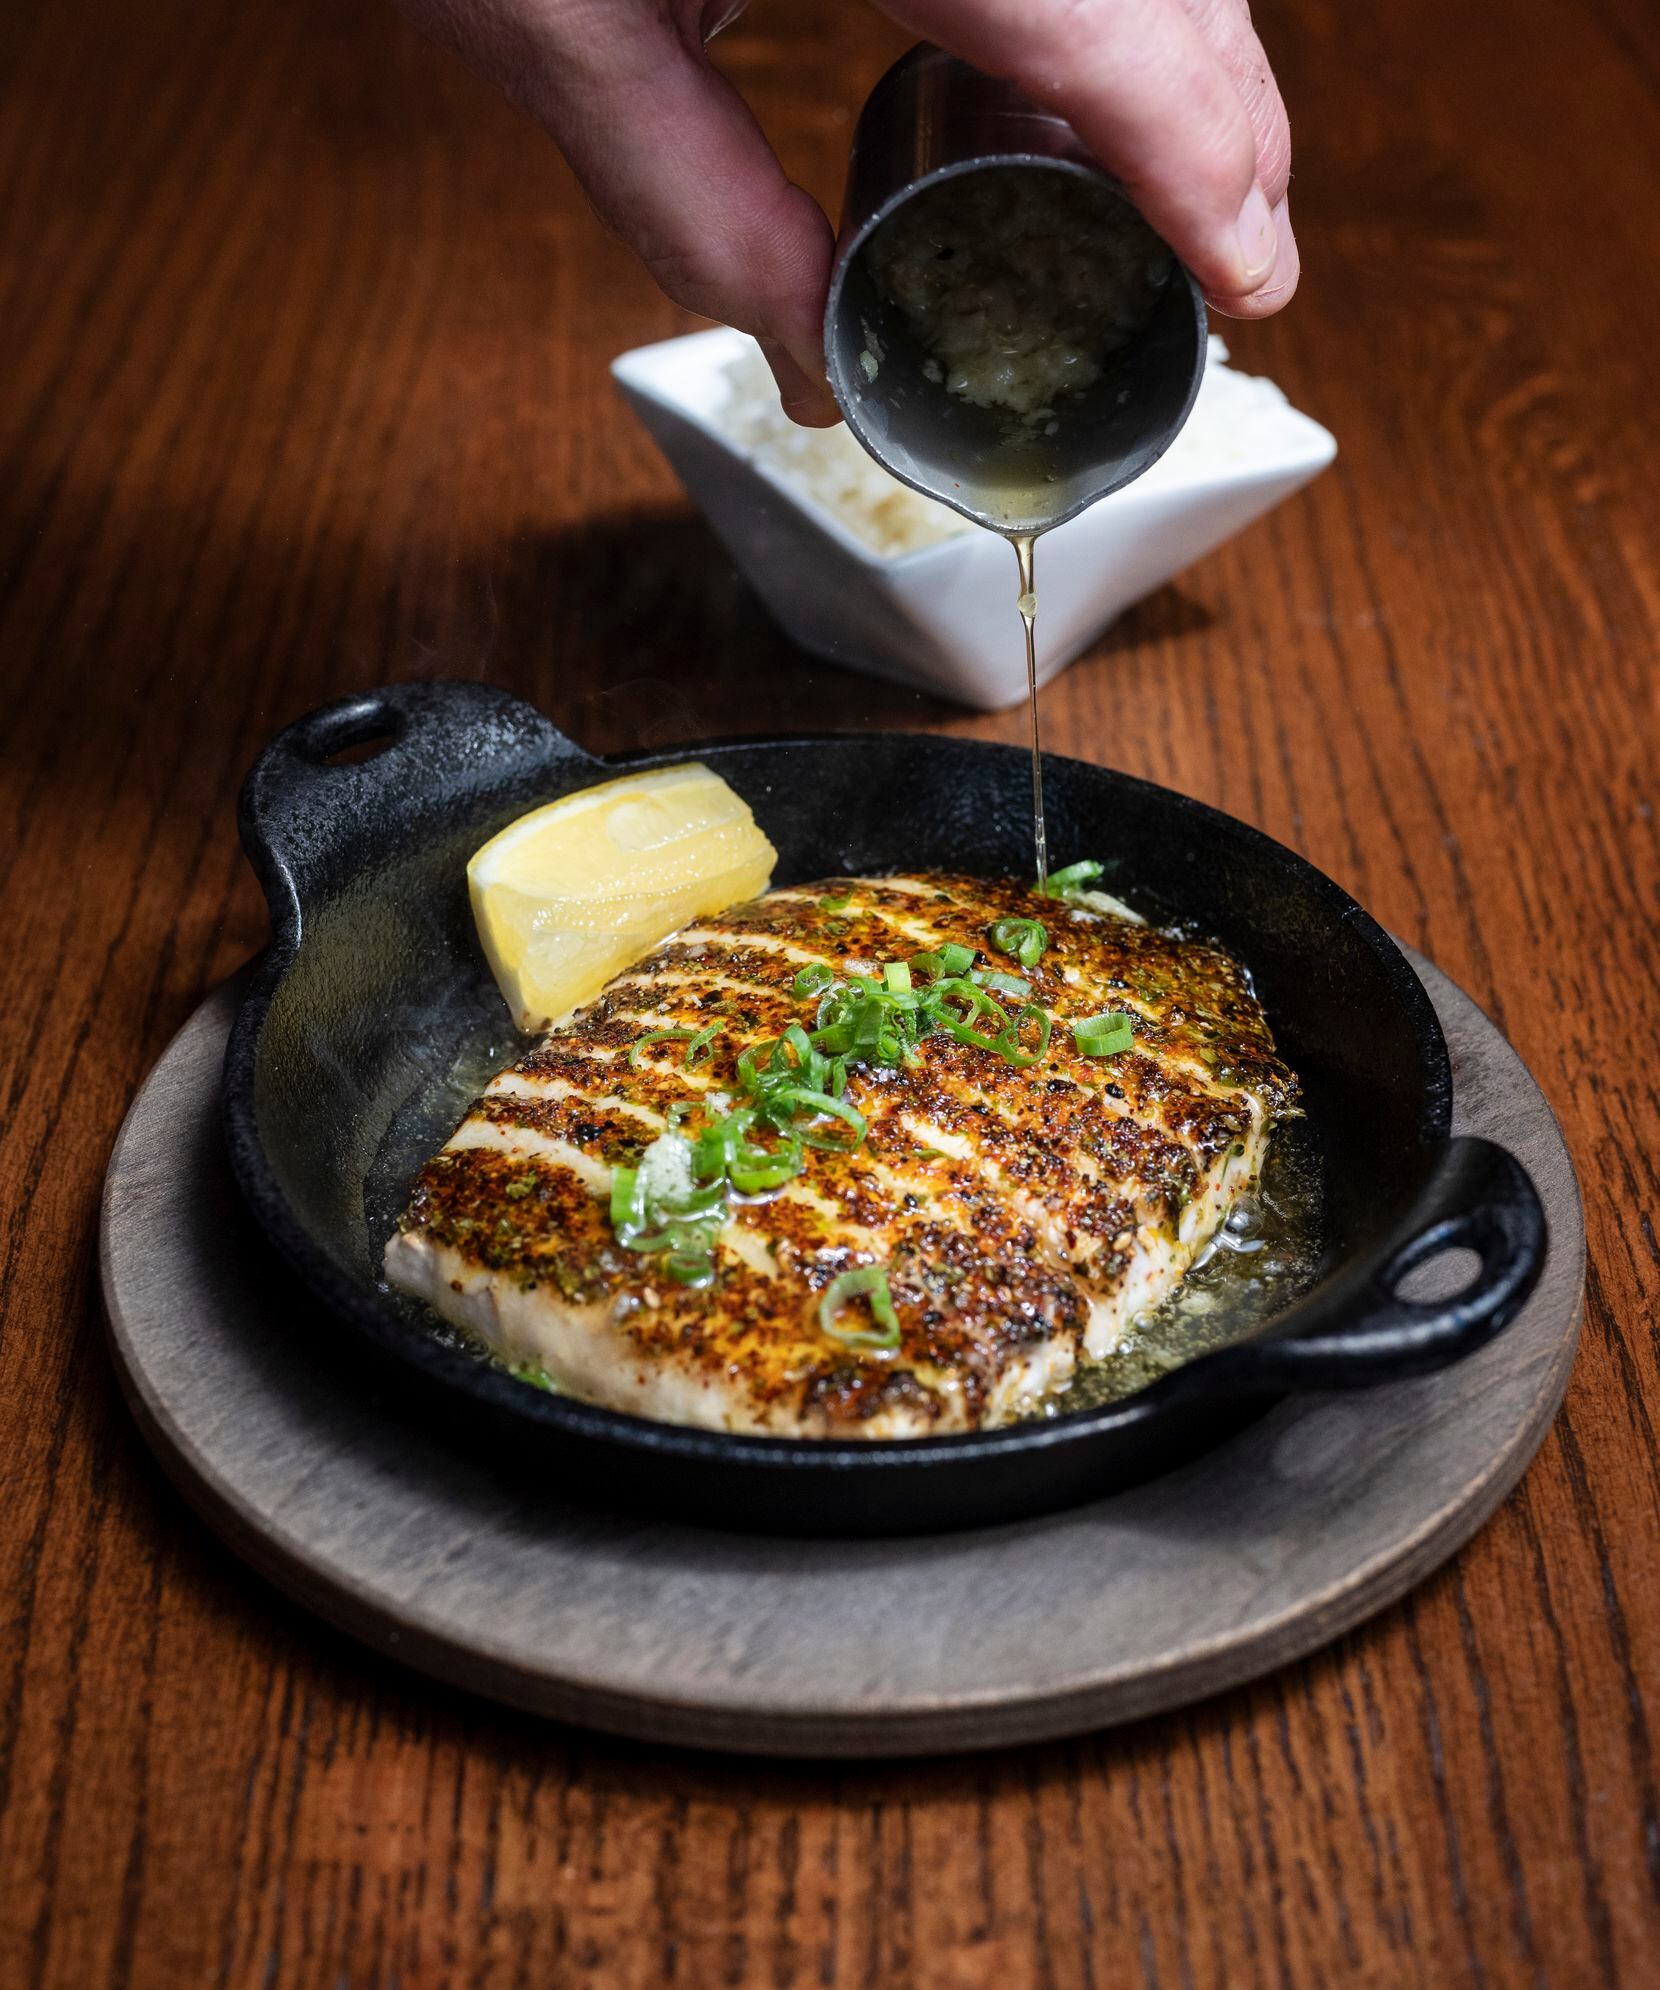 Pour garlic butter on the Cast Iron Swordfish dish with ginger and lemongrass from Shinsei restaurant in Dallas.